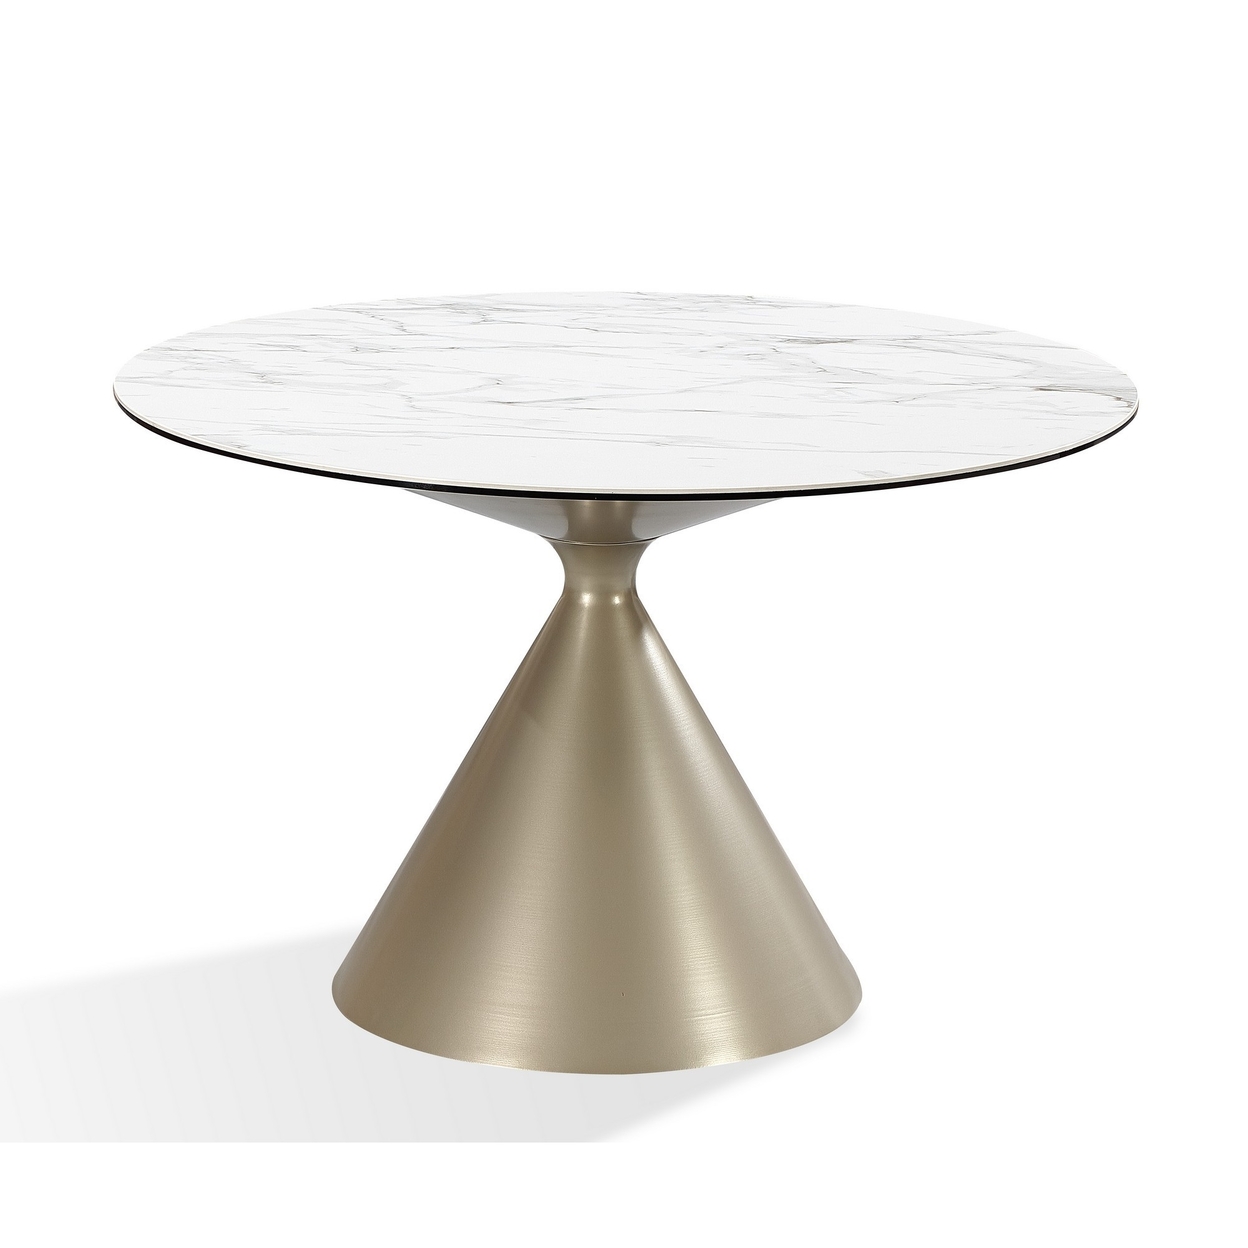 Lam 47 Inch Round Dining Table, Sintered Stone Top, Steel Base, Champagne - Saltoro Sherpi